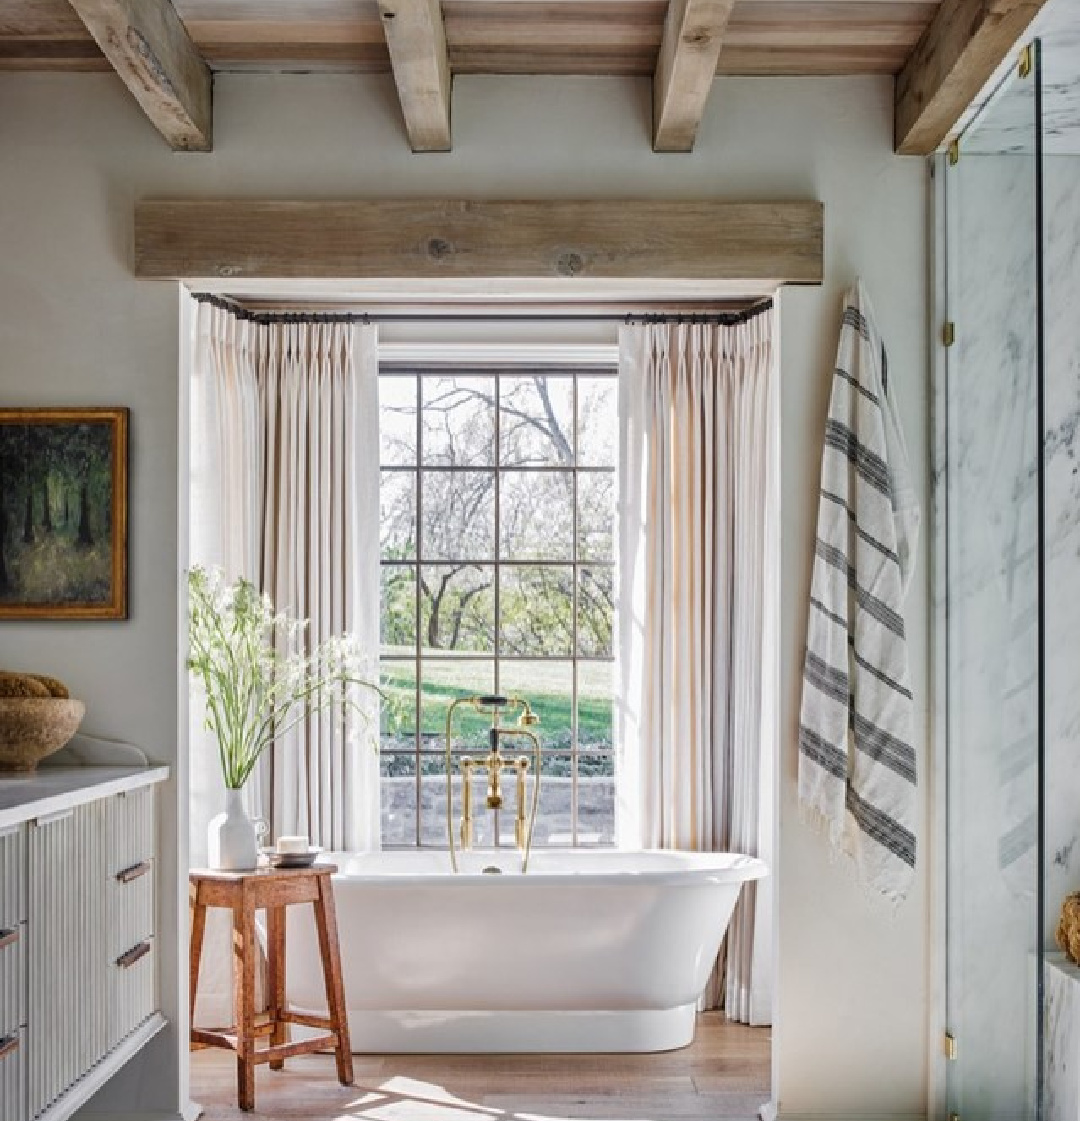 Magnificent architecture by Jeffrey Dungan Architects in a Kansas bathroom with soaking tub and rustic wood ceiling.